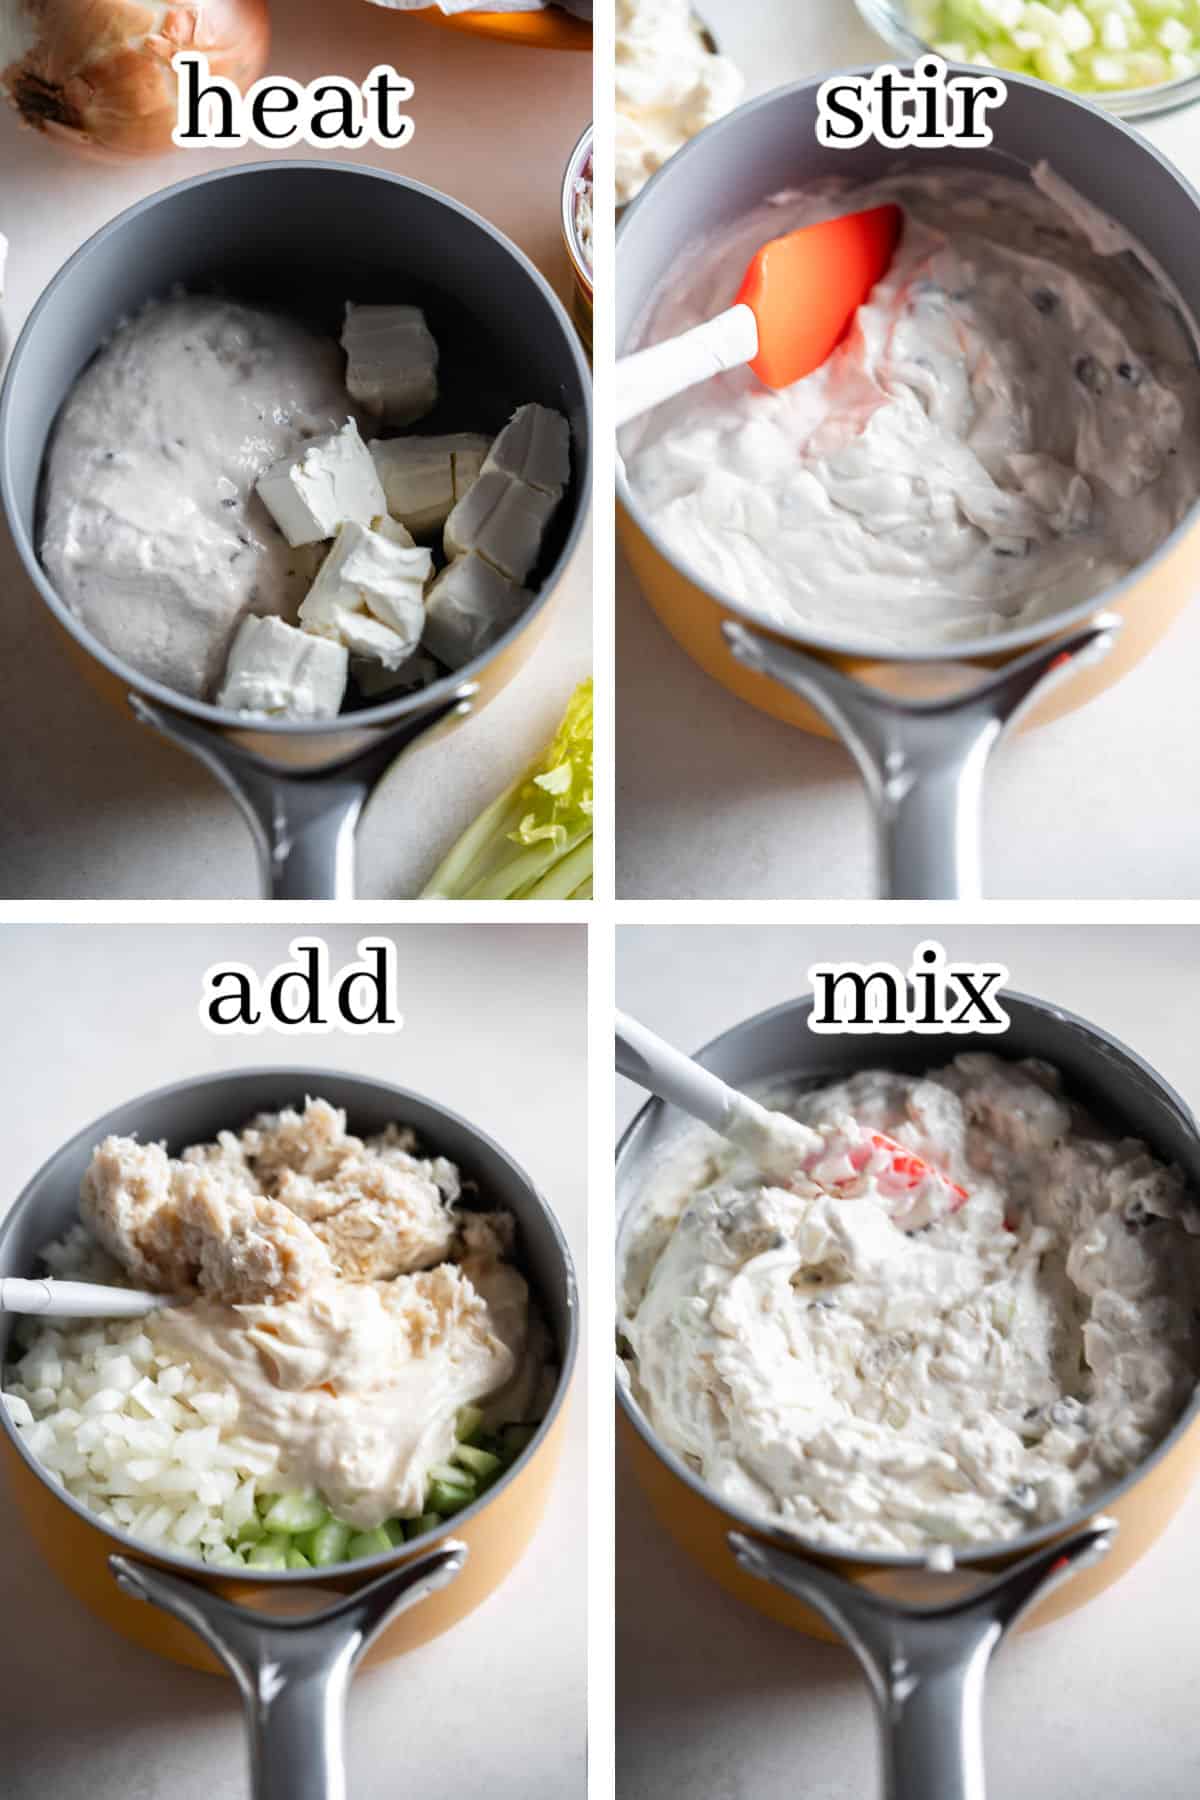 Step-by-step instructions to make the appetizer recipe. With print overlay. 